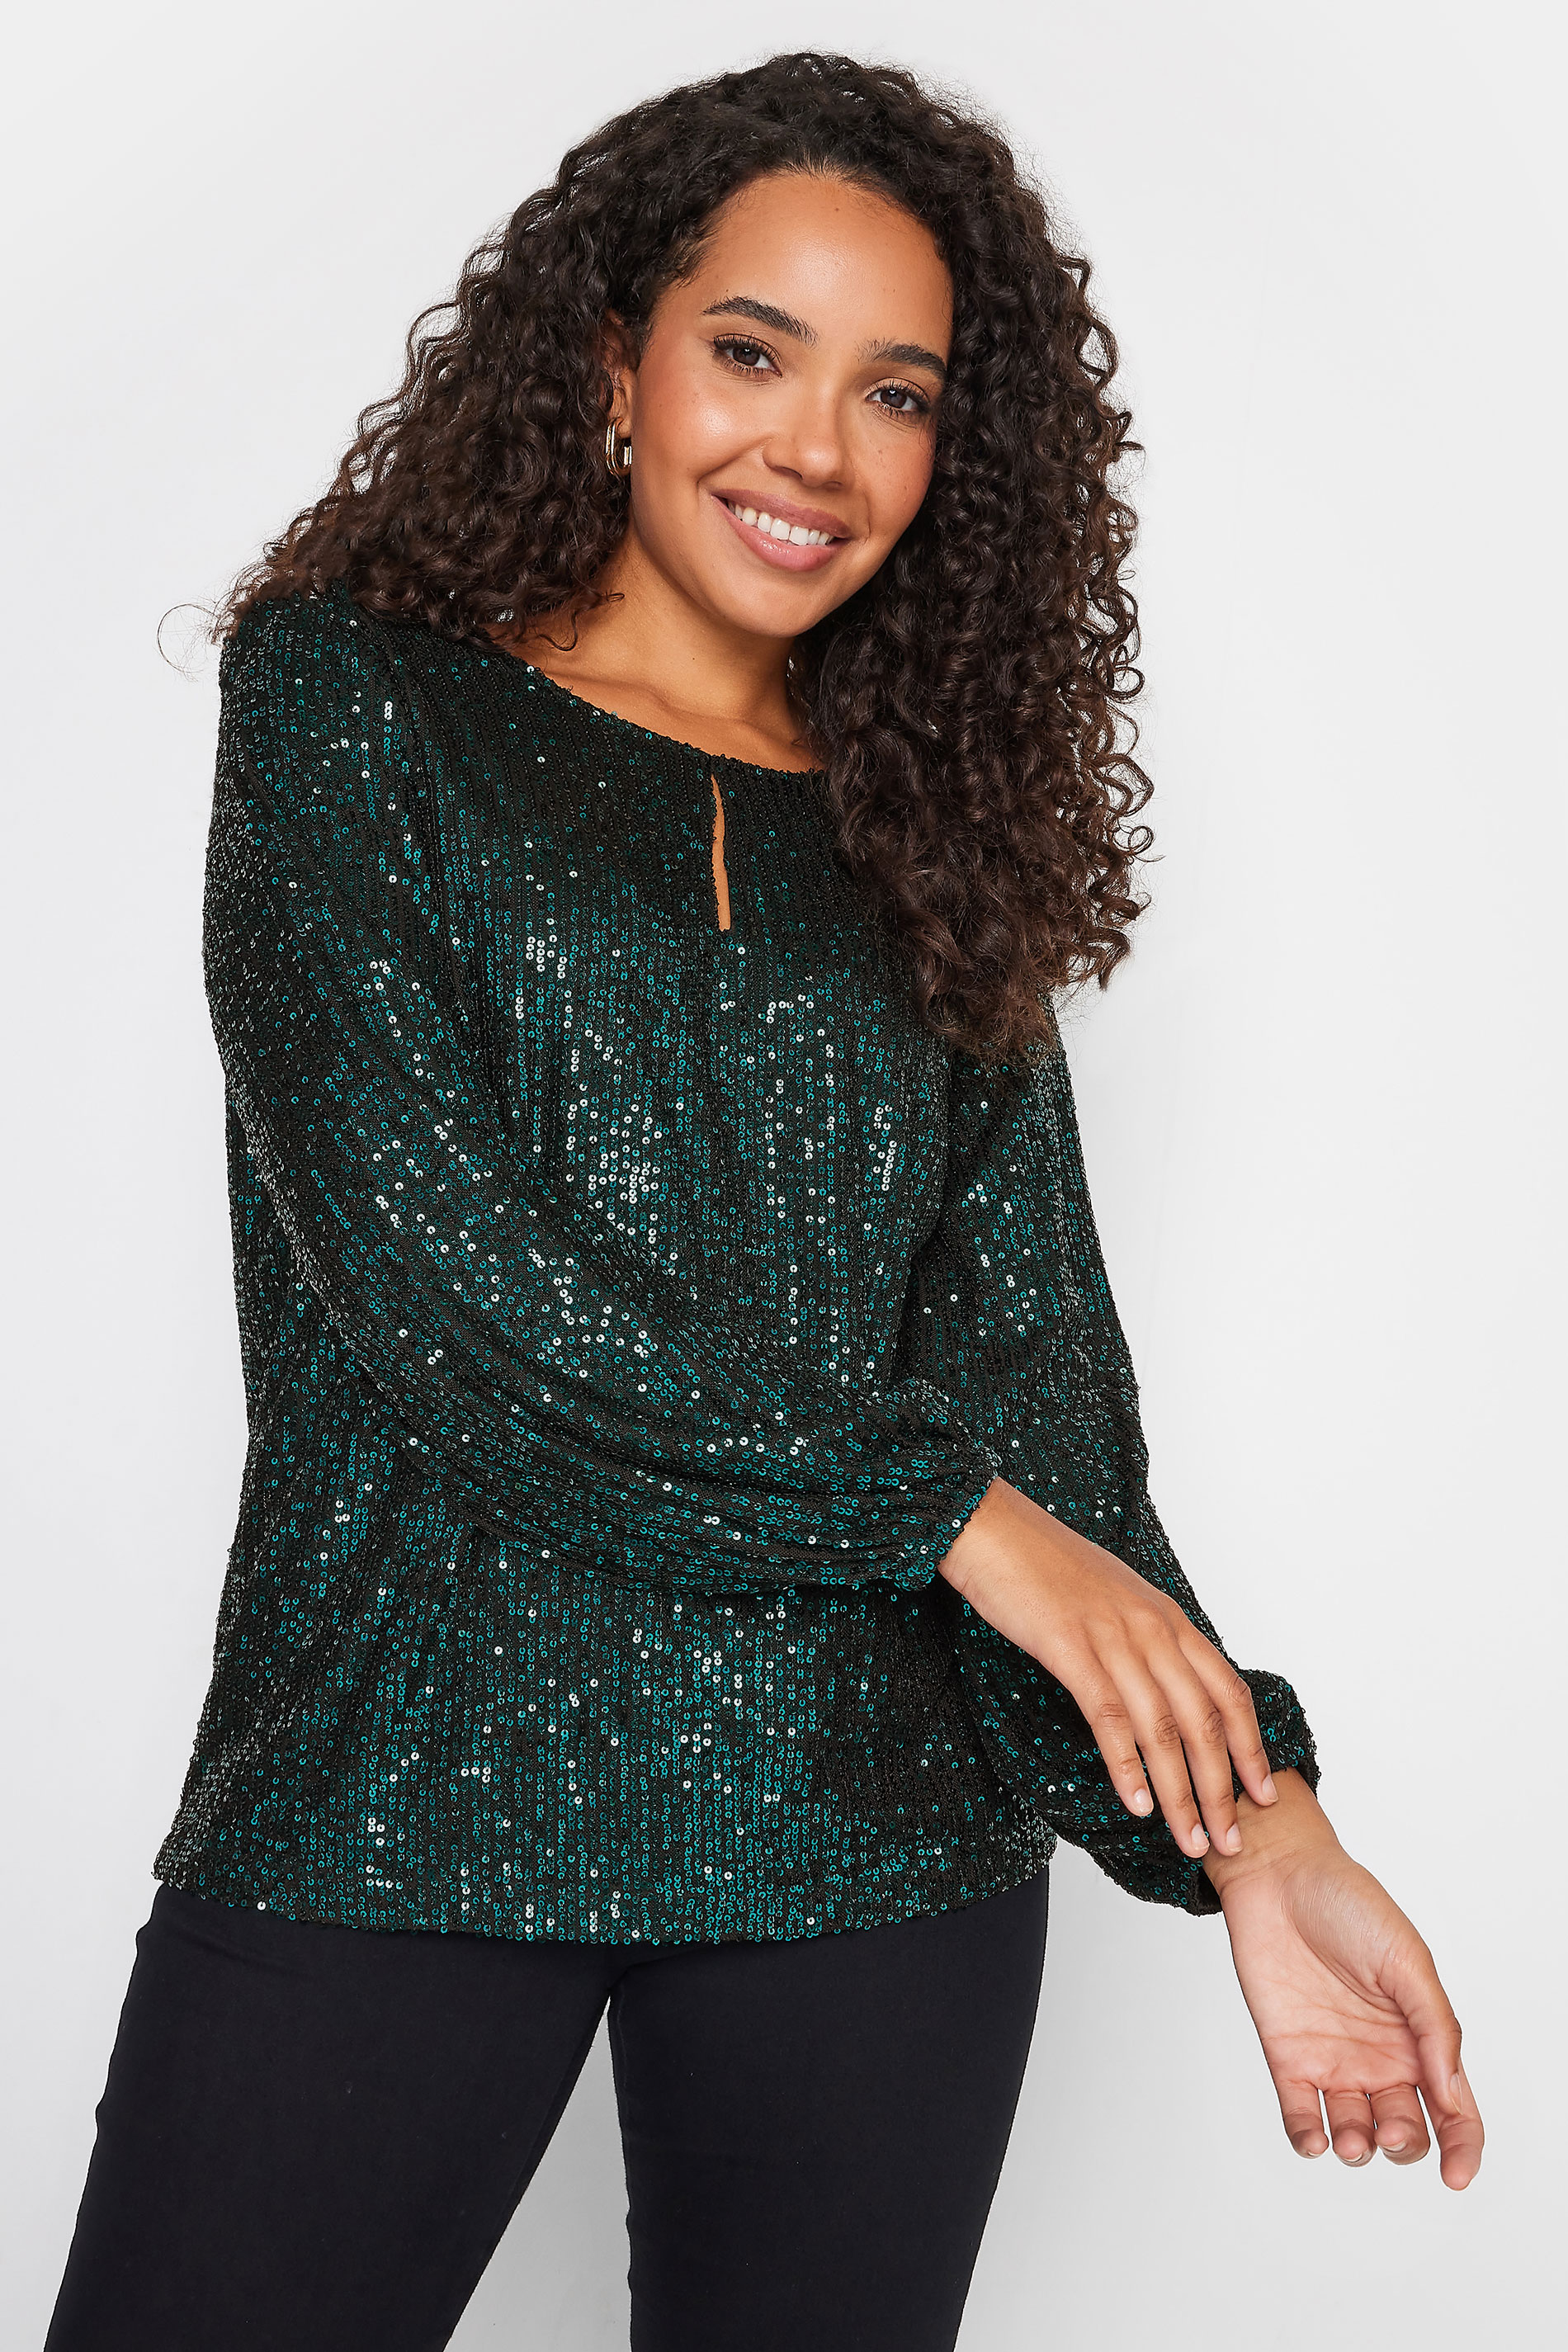 M&Co Dark Green Sequin Keyhole Long Sleeve Top | M&Co 2